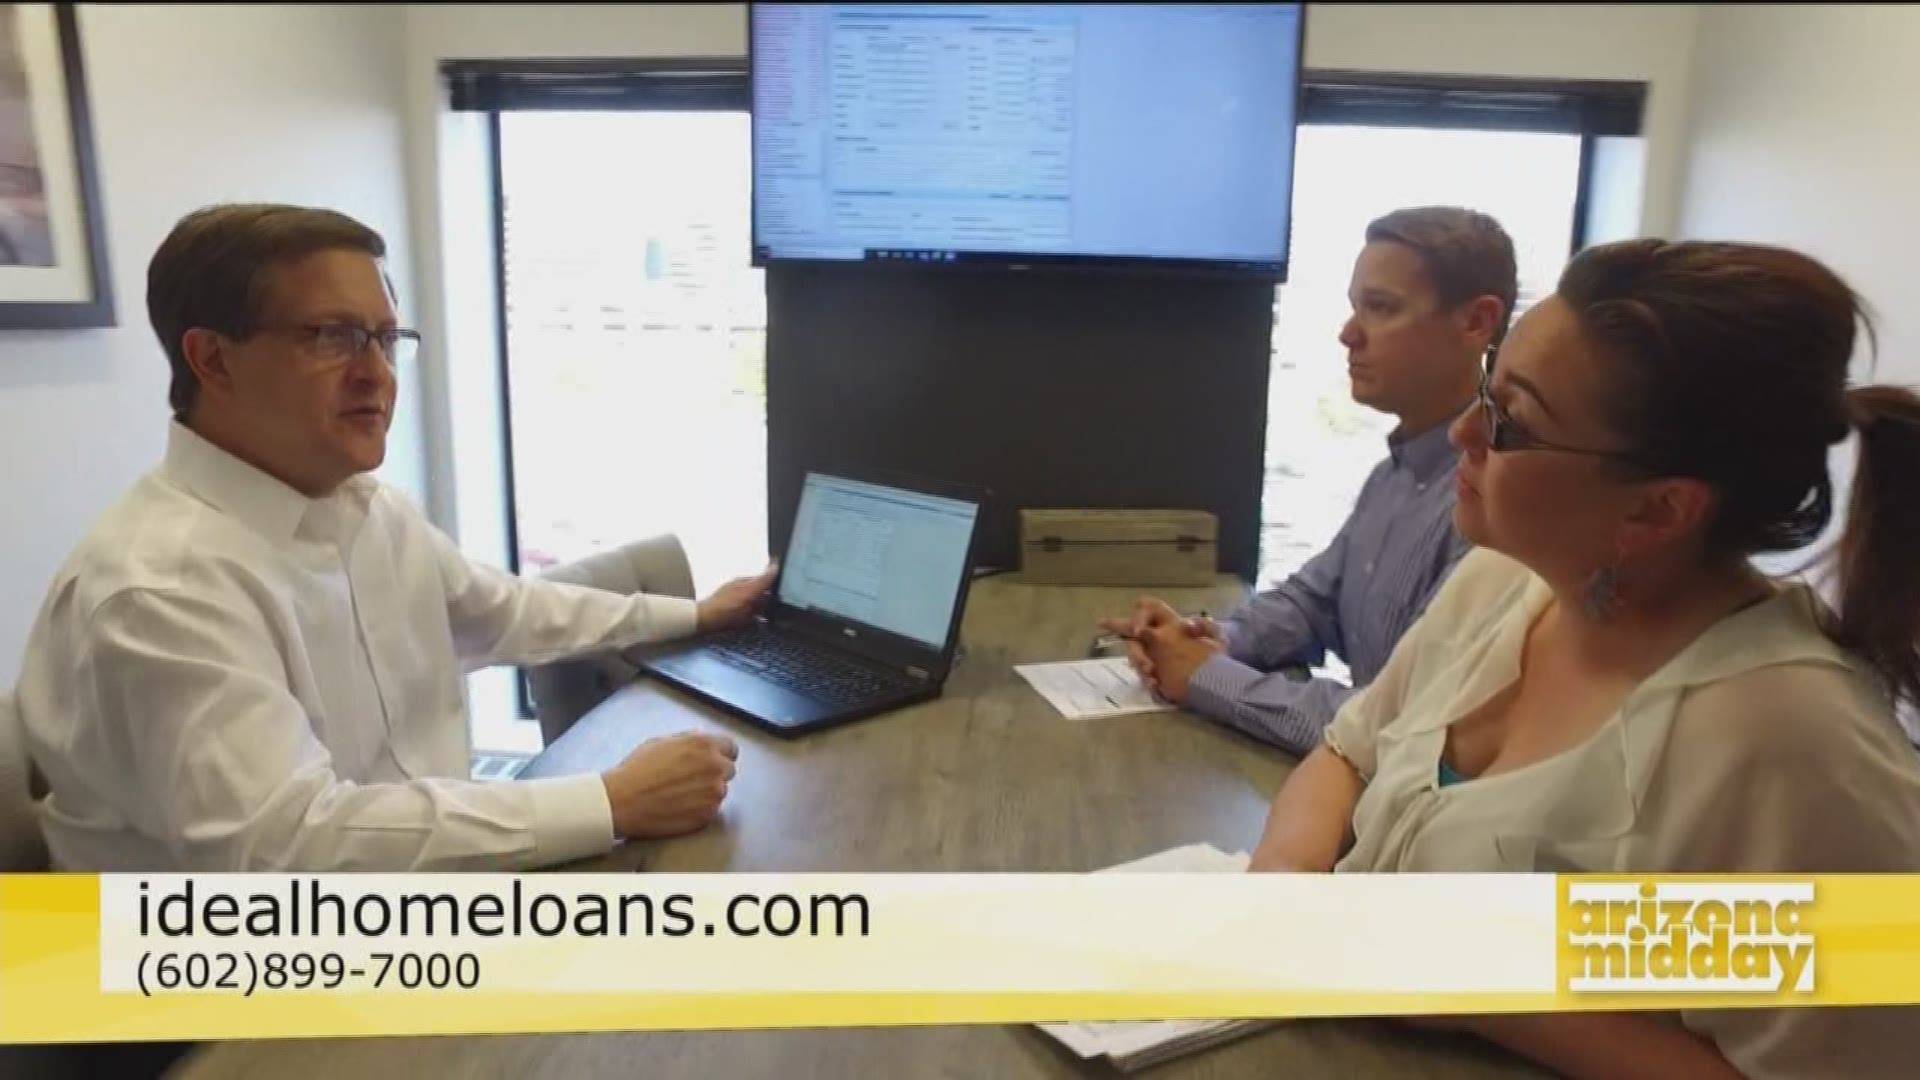 Brent Ivinson from Ideal Home Loans is back to help you understand the lowering mortgage rates and how to properly take out a home loan.